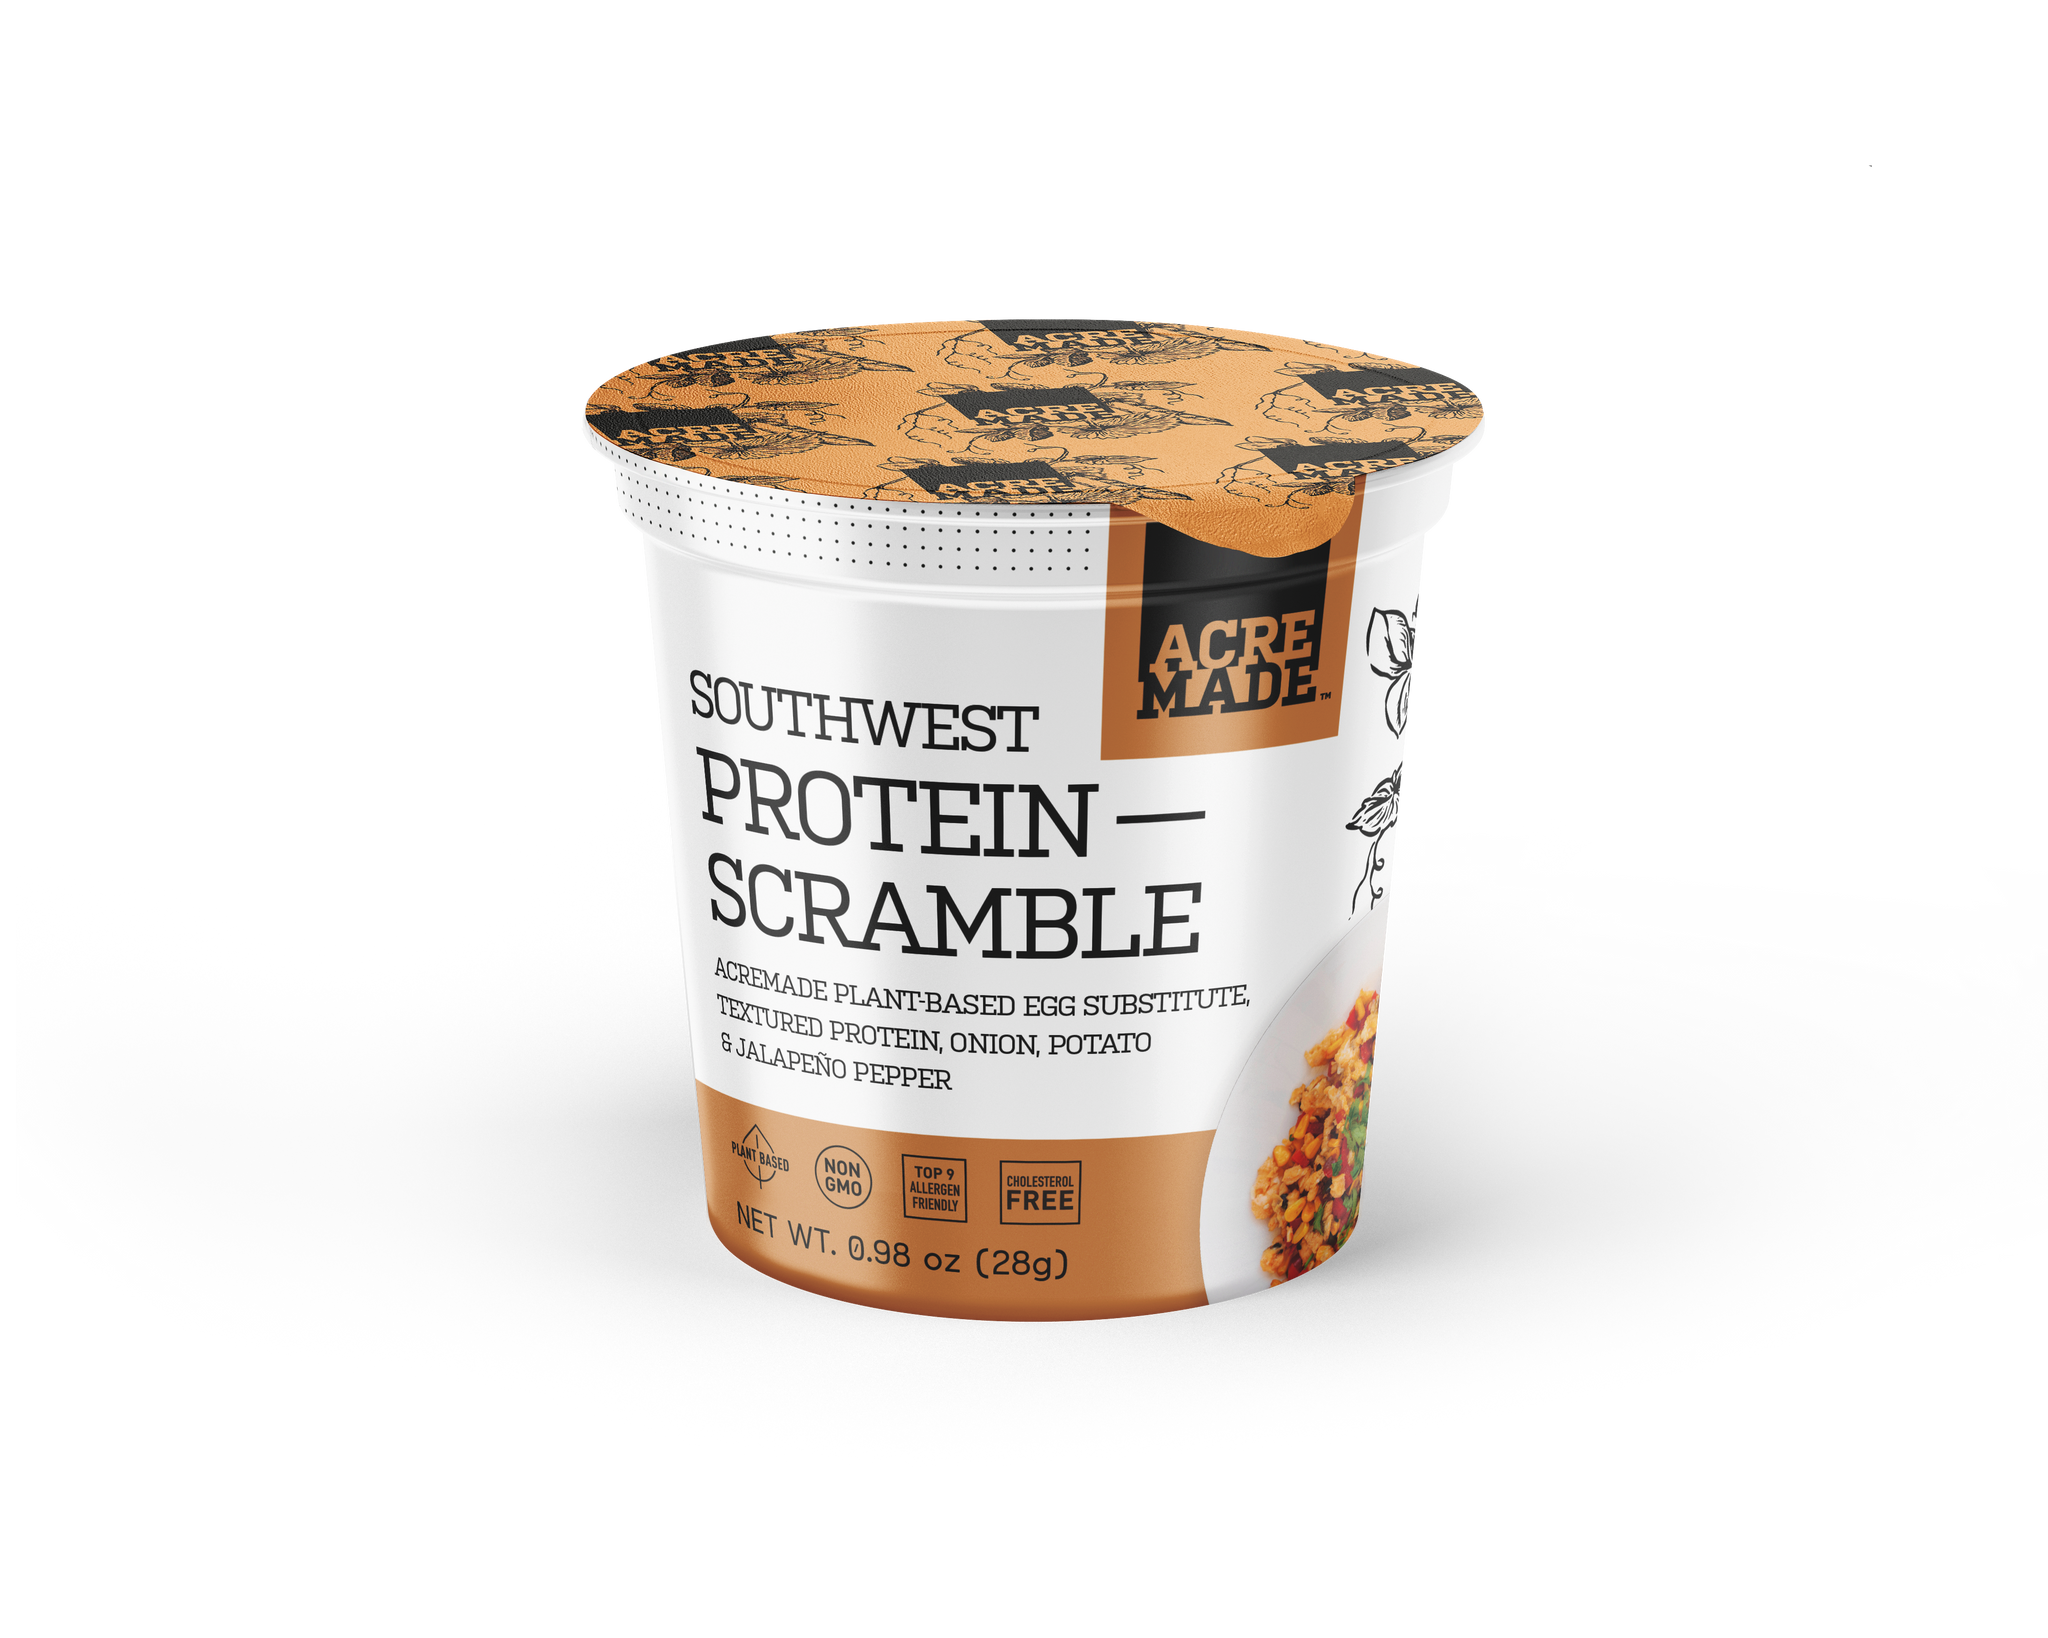 AcreMade Plant-Based Protein Scramble Cup (4 Case Pack/32 cups)